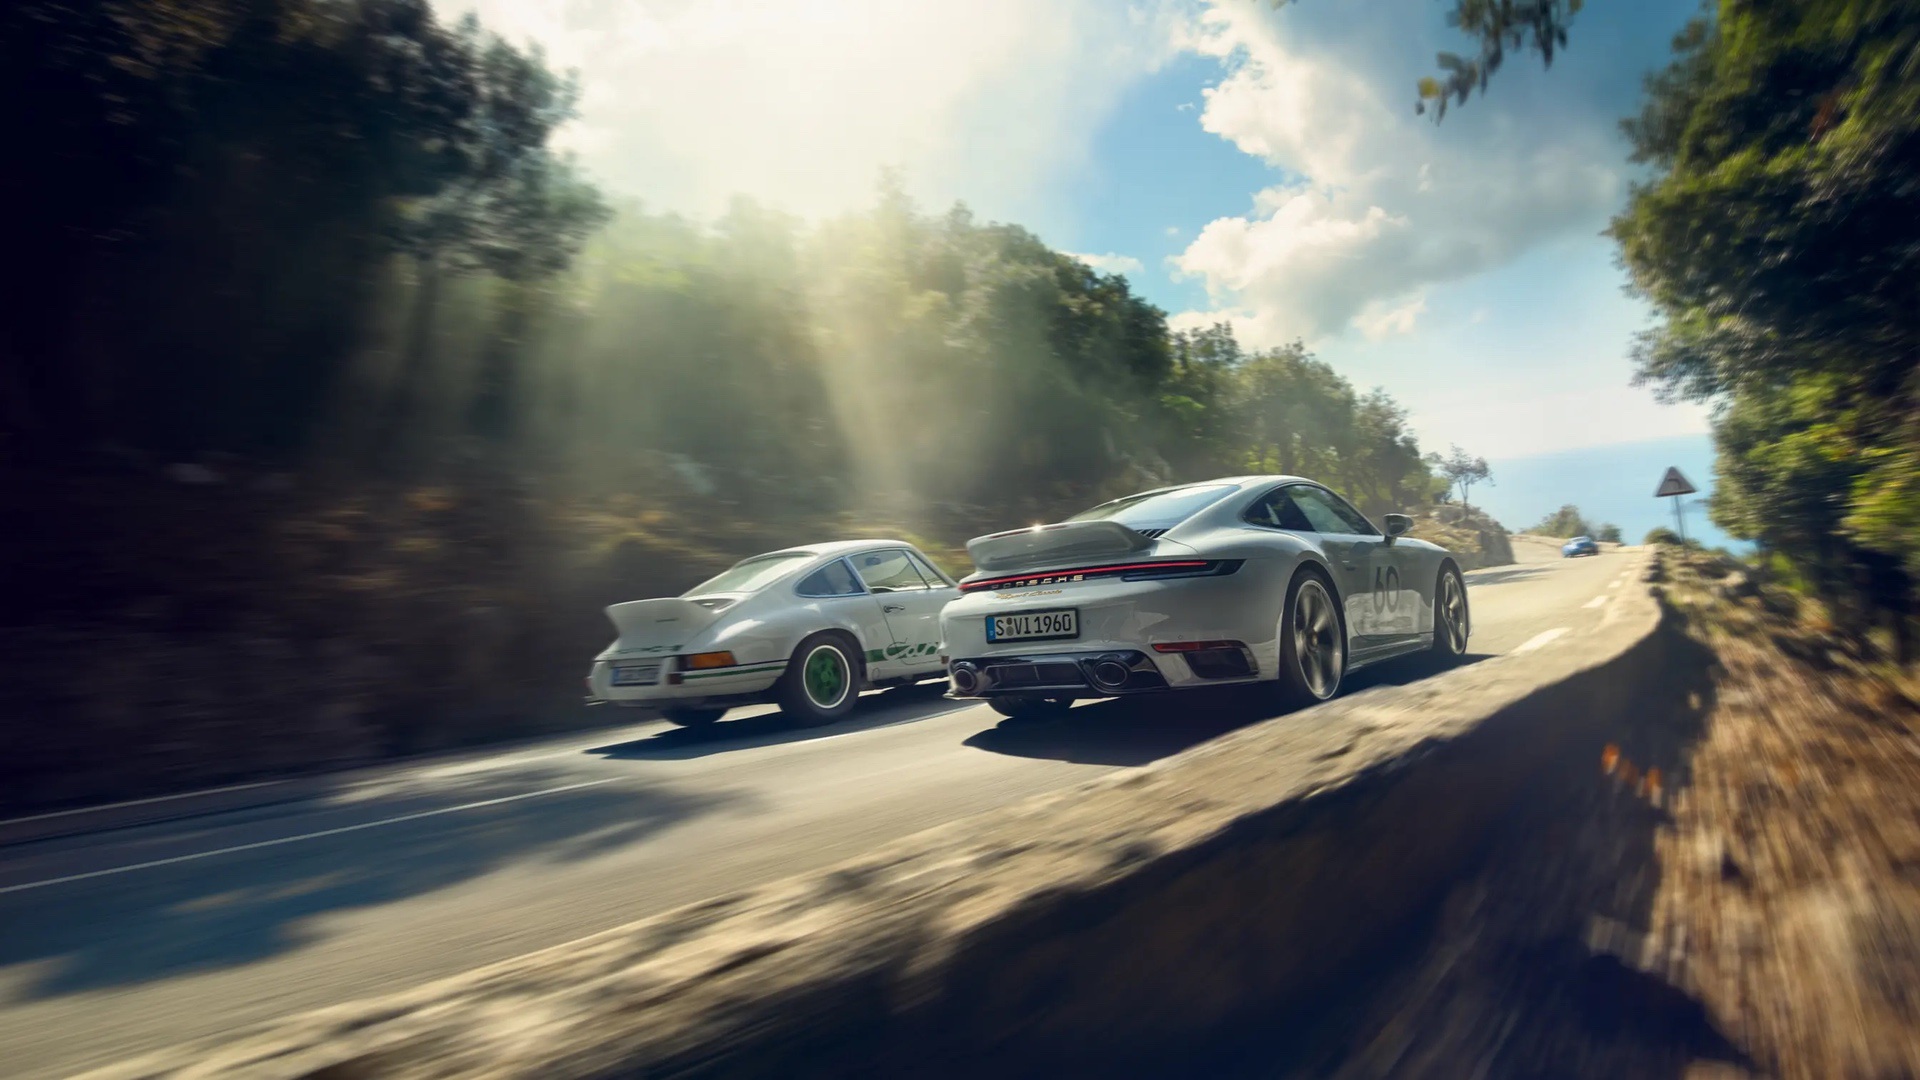 The 2023 Porsche 911 Sport Classic driving beside one of the cars that inspired it, the Carrera 2.7 RS